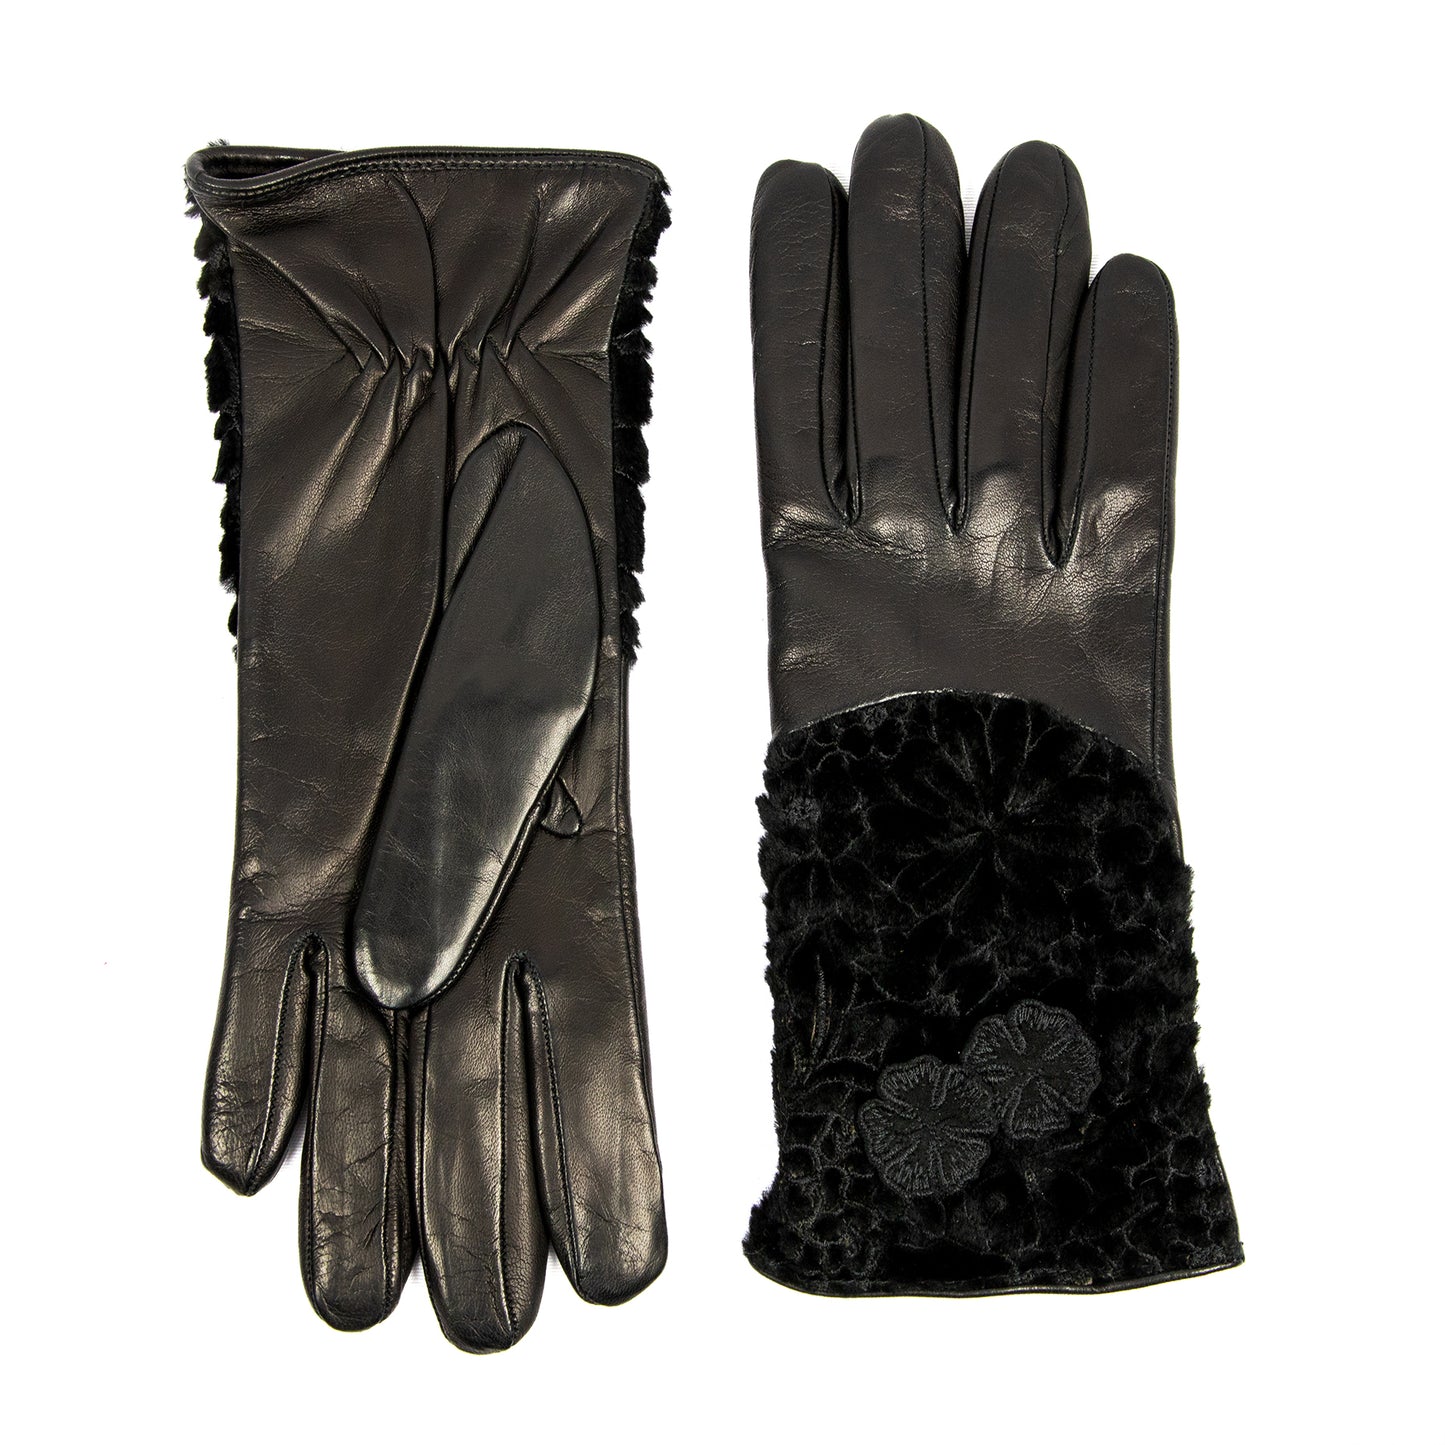 Women's black nappa leather gloves with floral embroidered fur on top